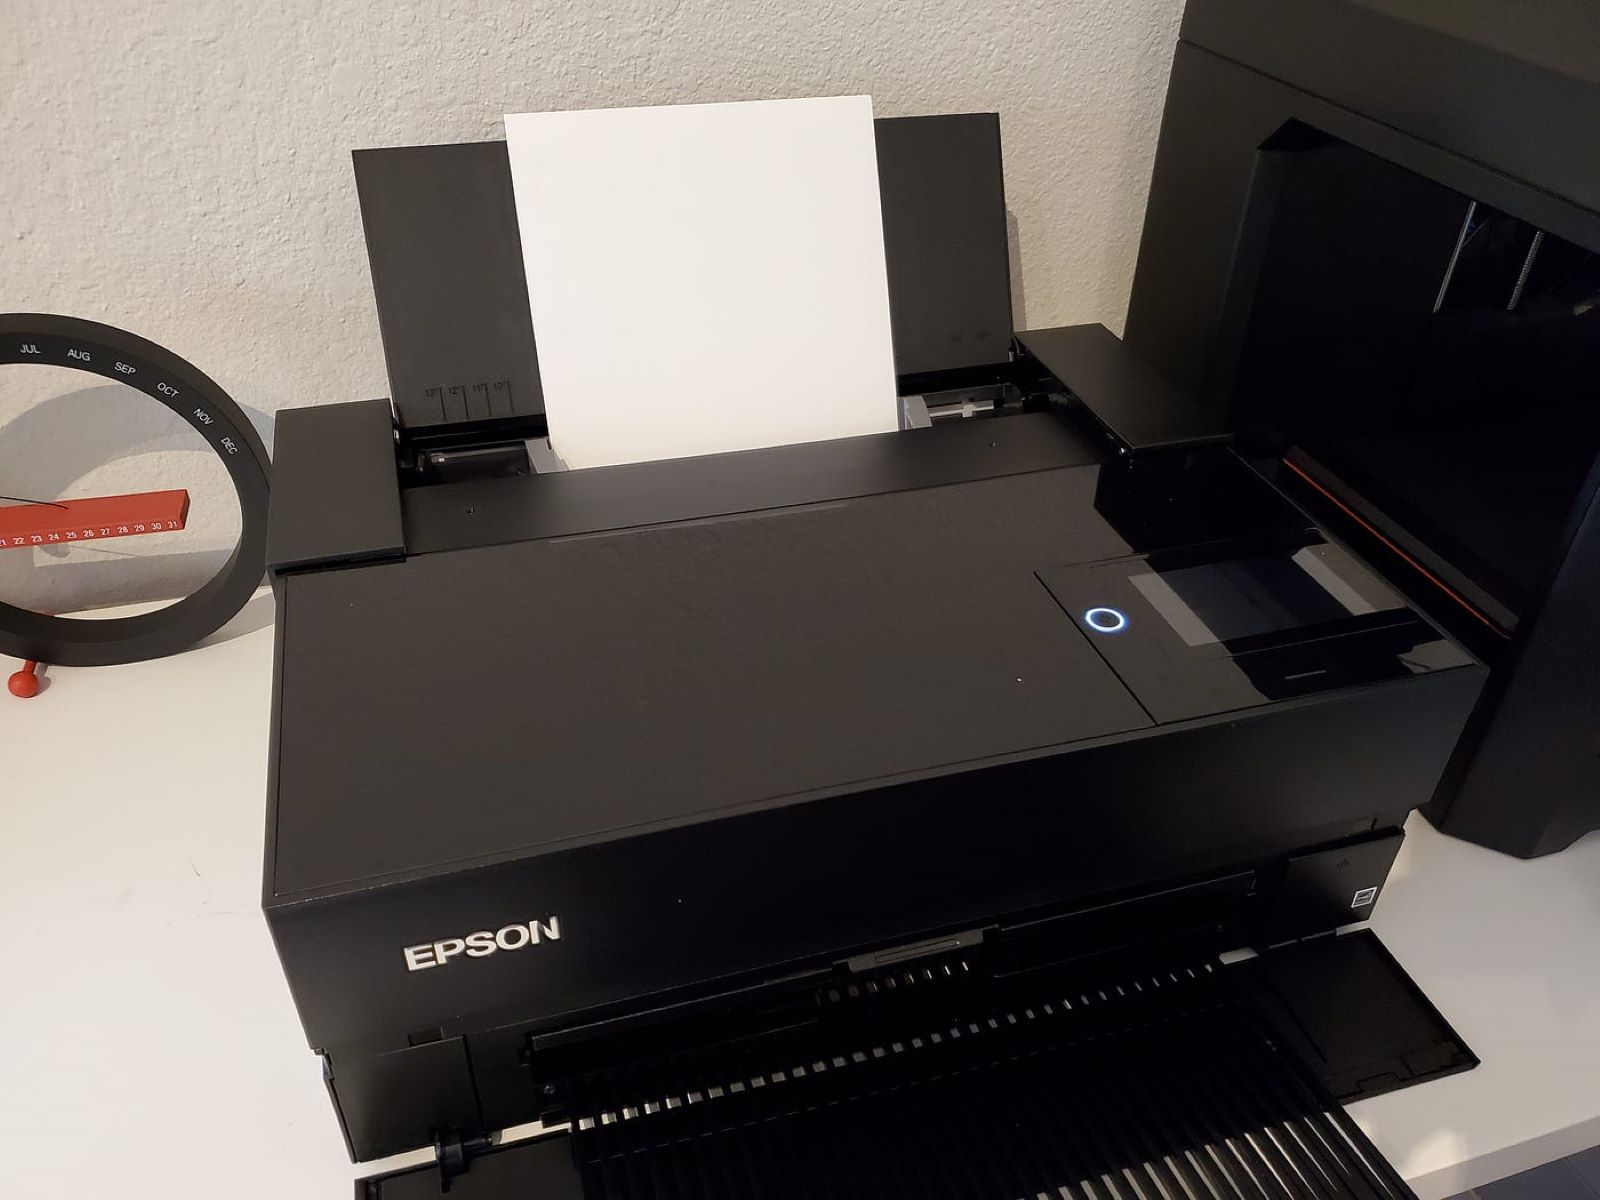 Why Is My Printer Printing Small